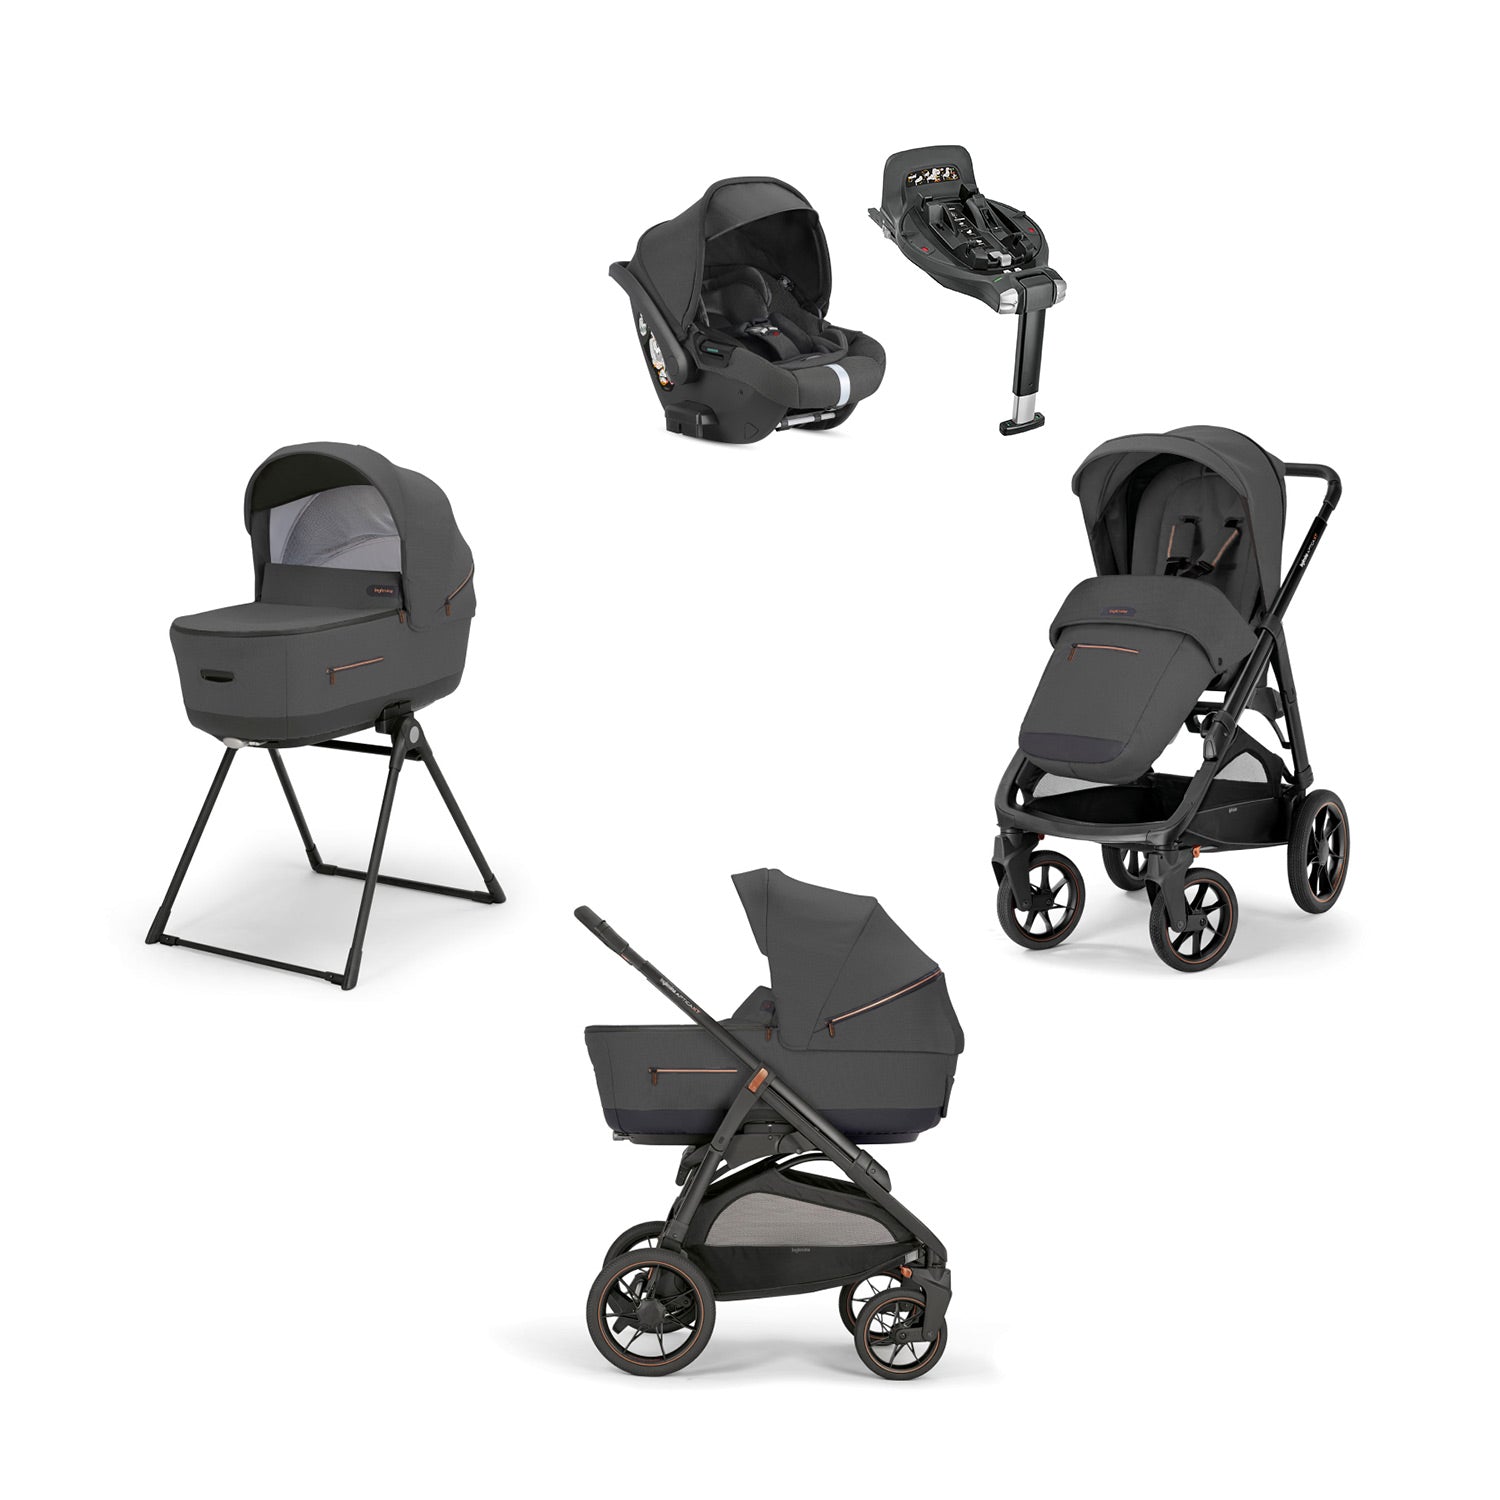 Image of Aptica XT System Magnet Grey Darwin Infant Recline car Seat 360° I-size Base Black Chassis